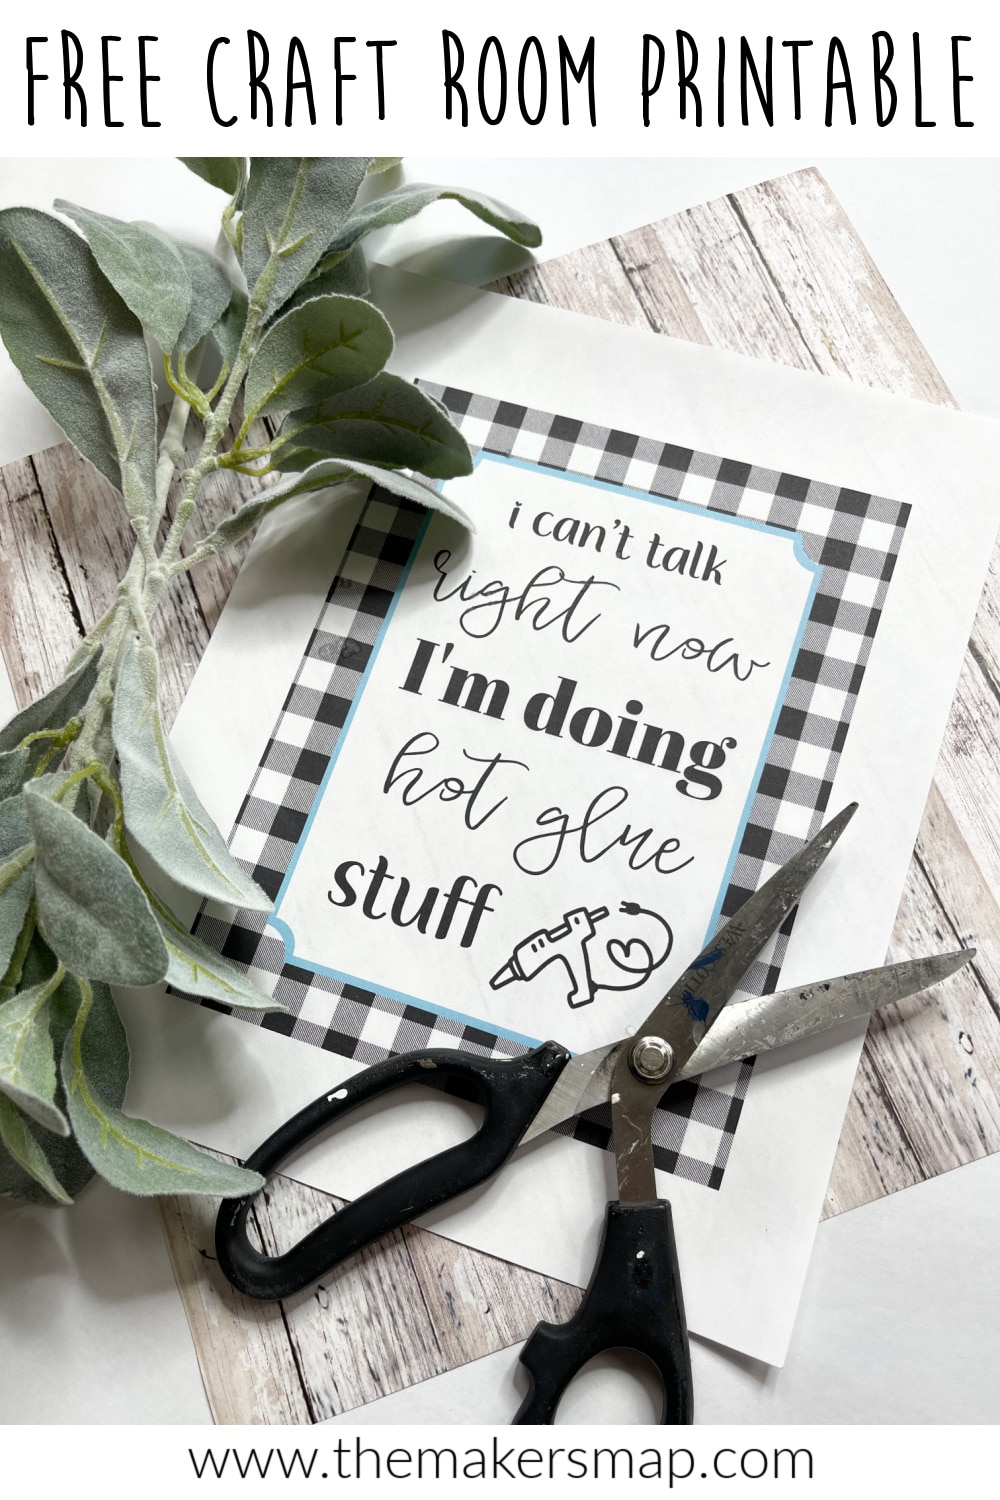 Making The World Cuter - Cute and Easy Gift Ideas! Home Decor, Printables  and More!